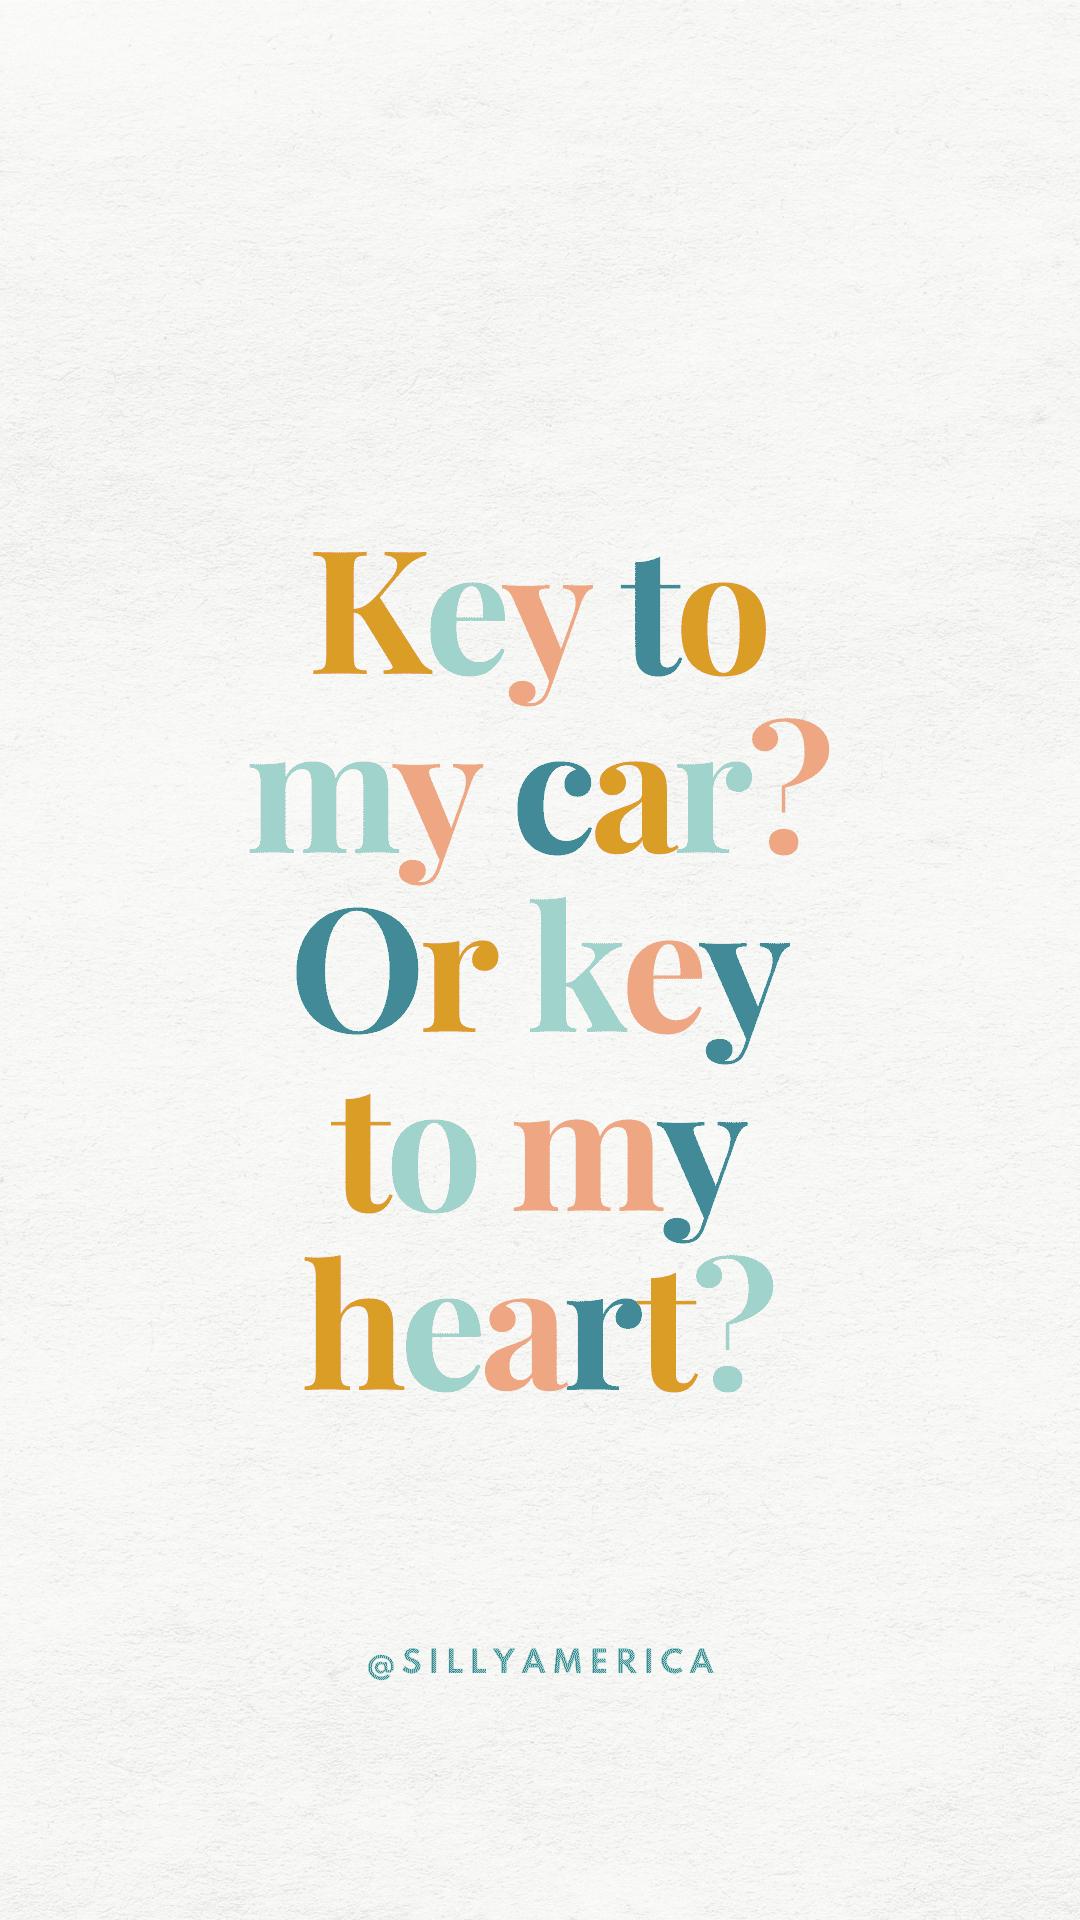 Key to my car? Or key to my heart? - Road Trip Captions for Instagram